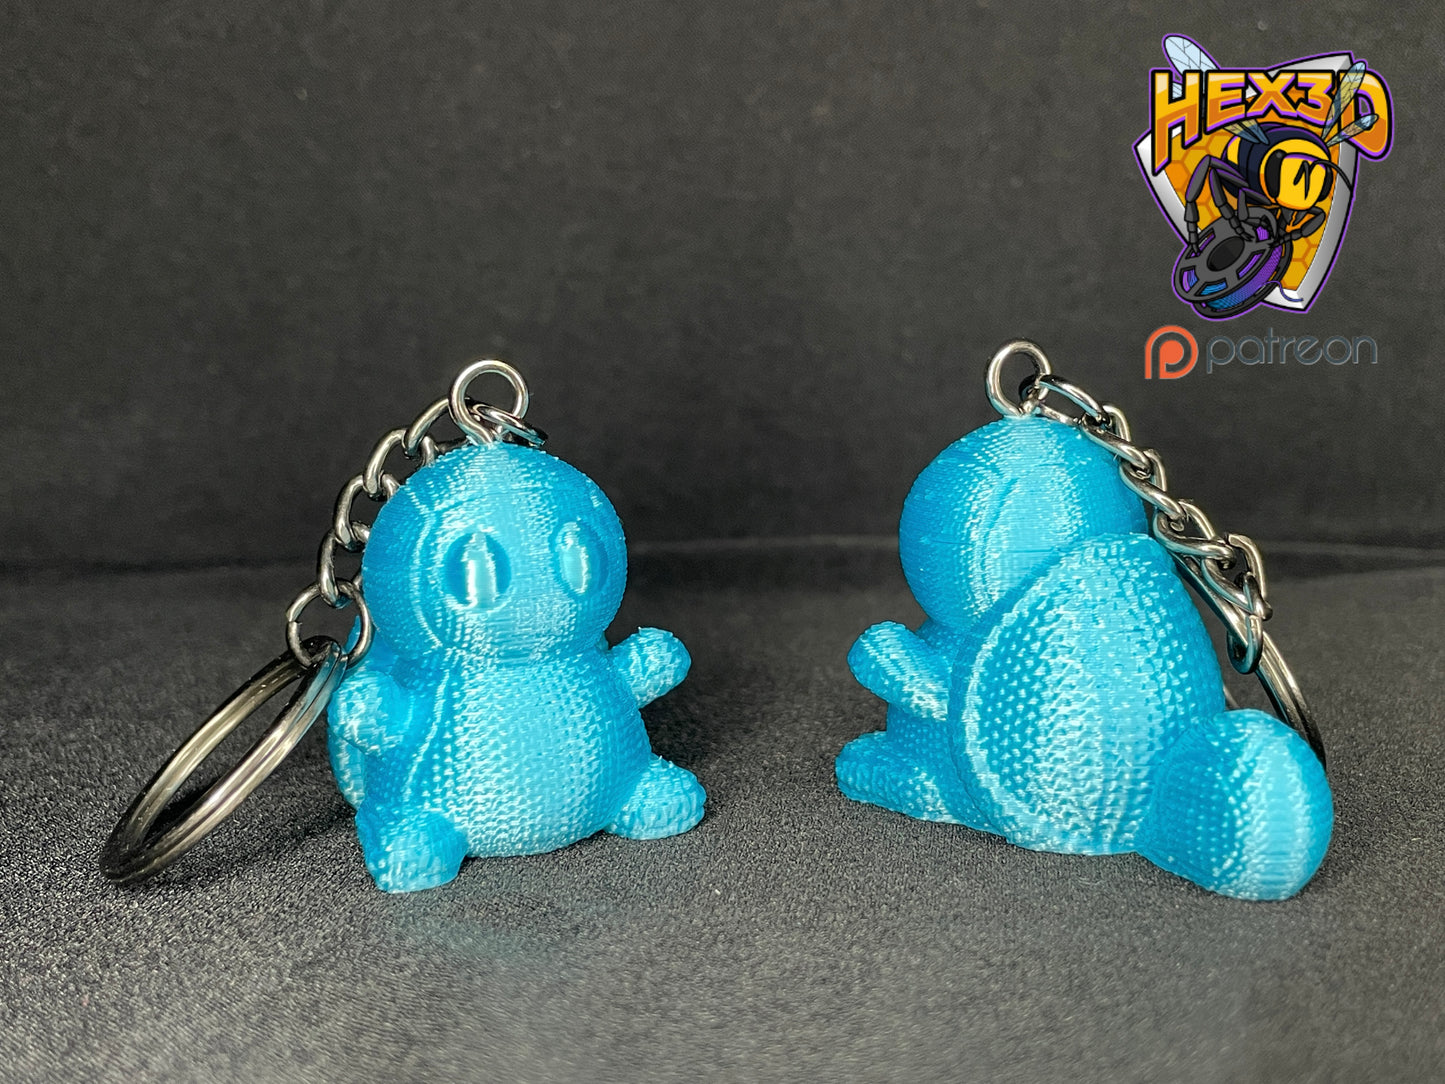 "Knitted" Squirtle Keychain by Hex3D